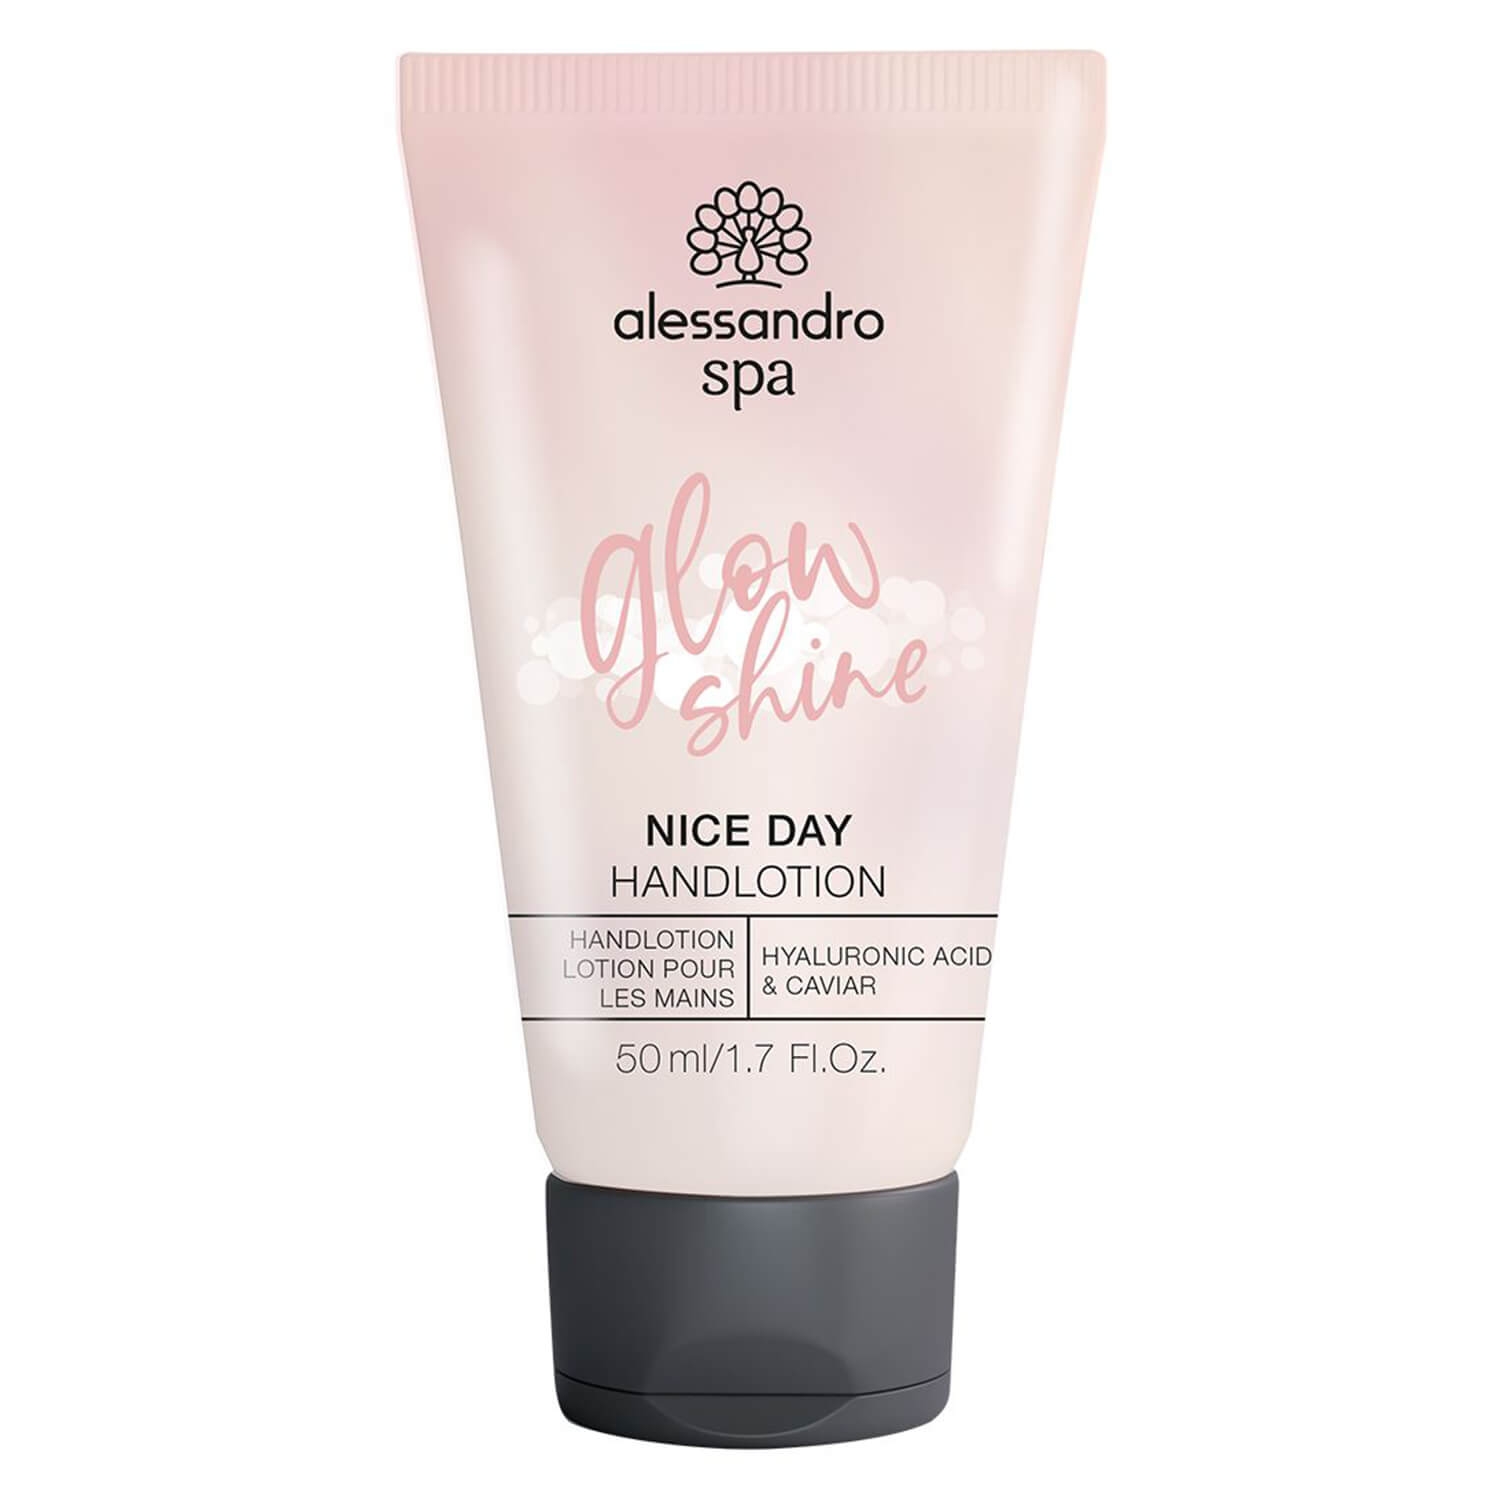 Product image from Alessandro Spa - Nice Day Glow Shine Handlotion